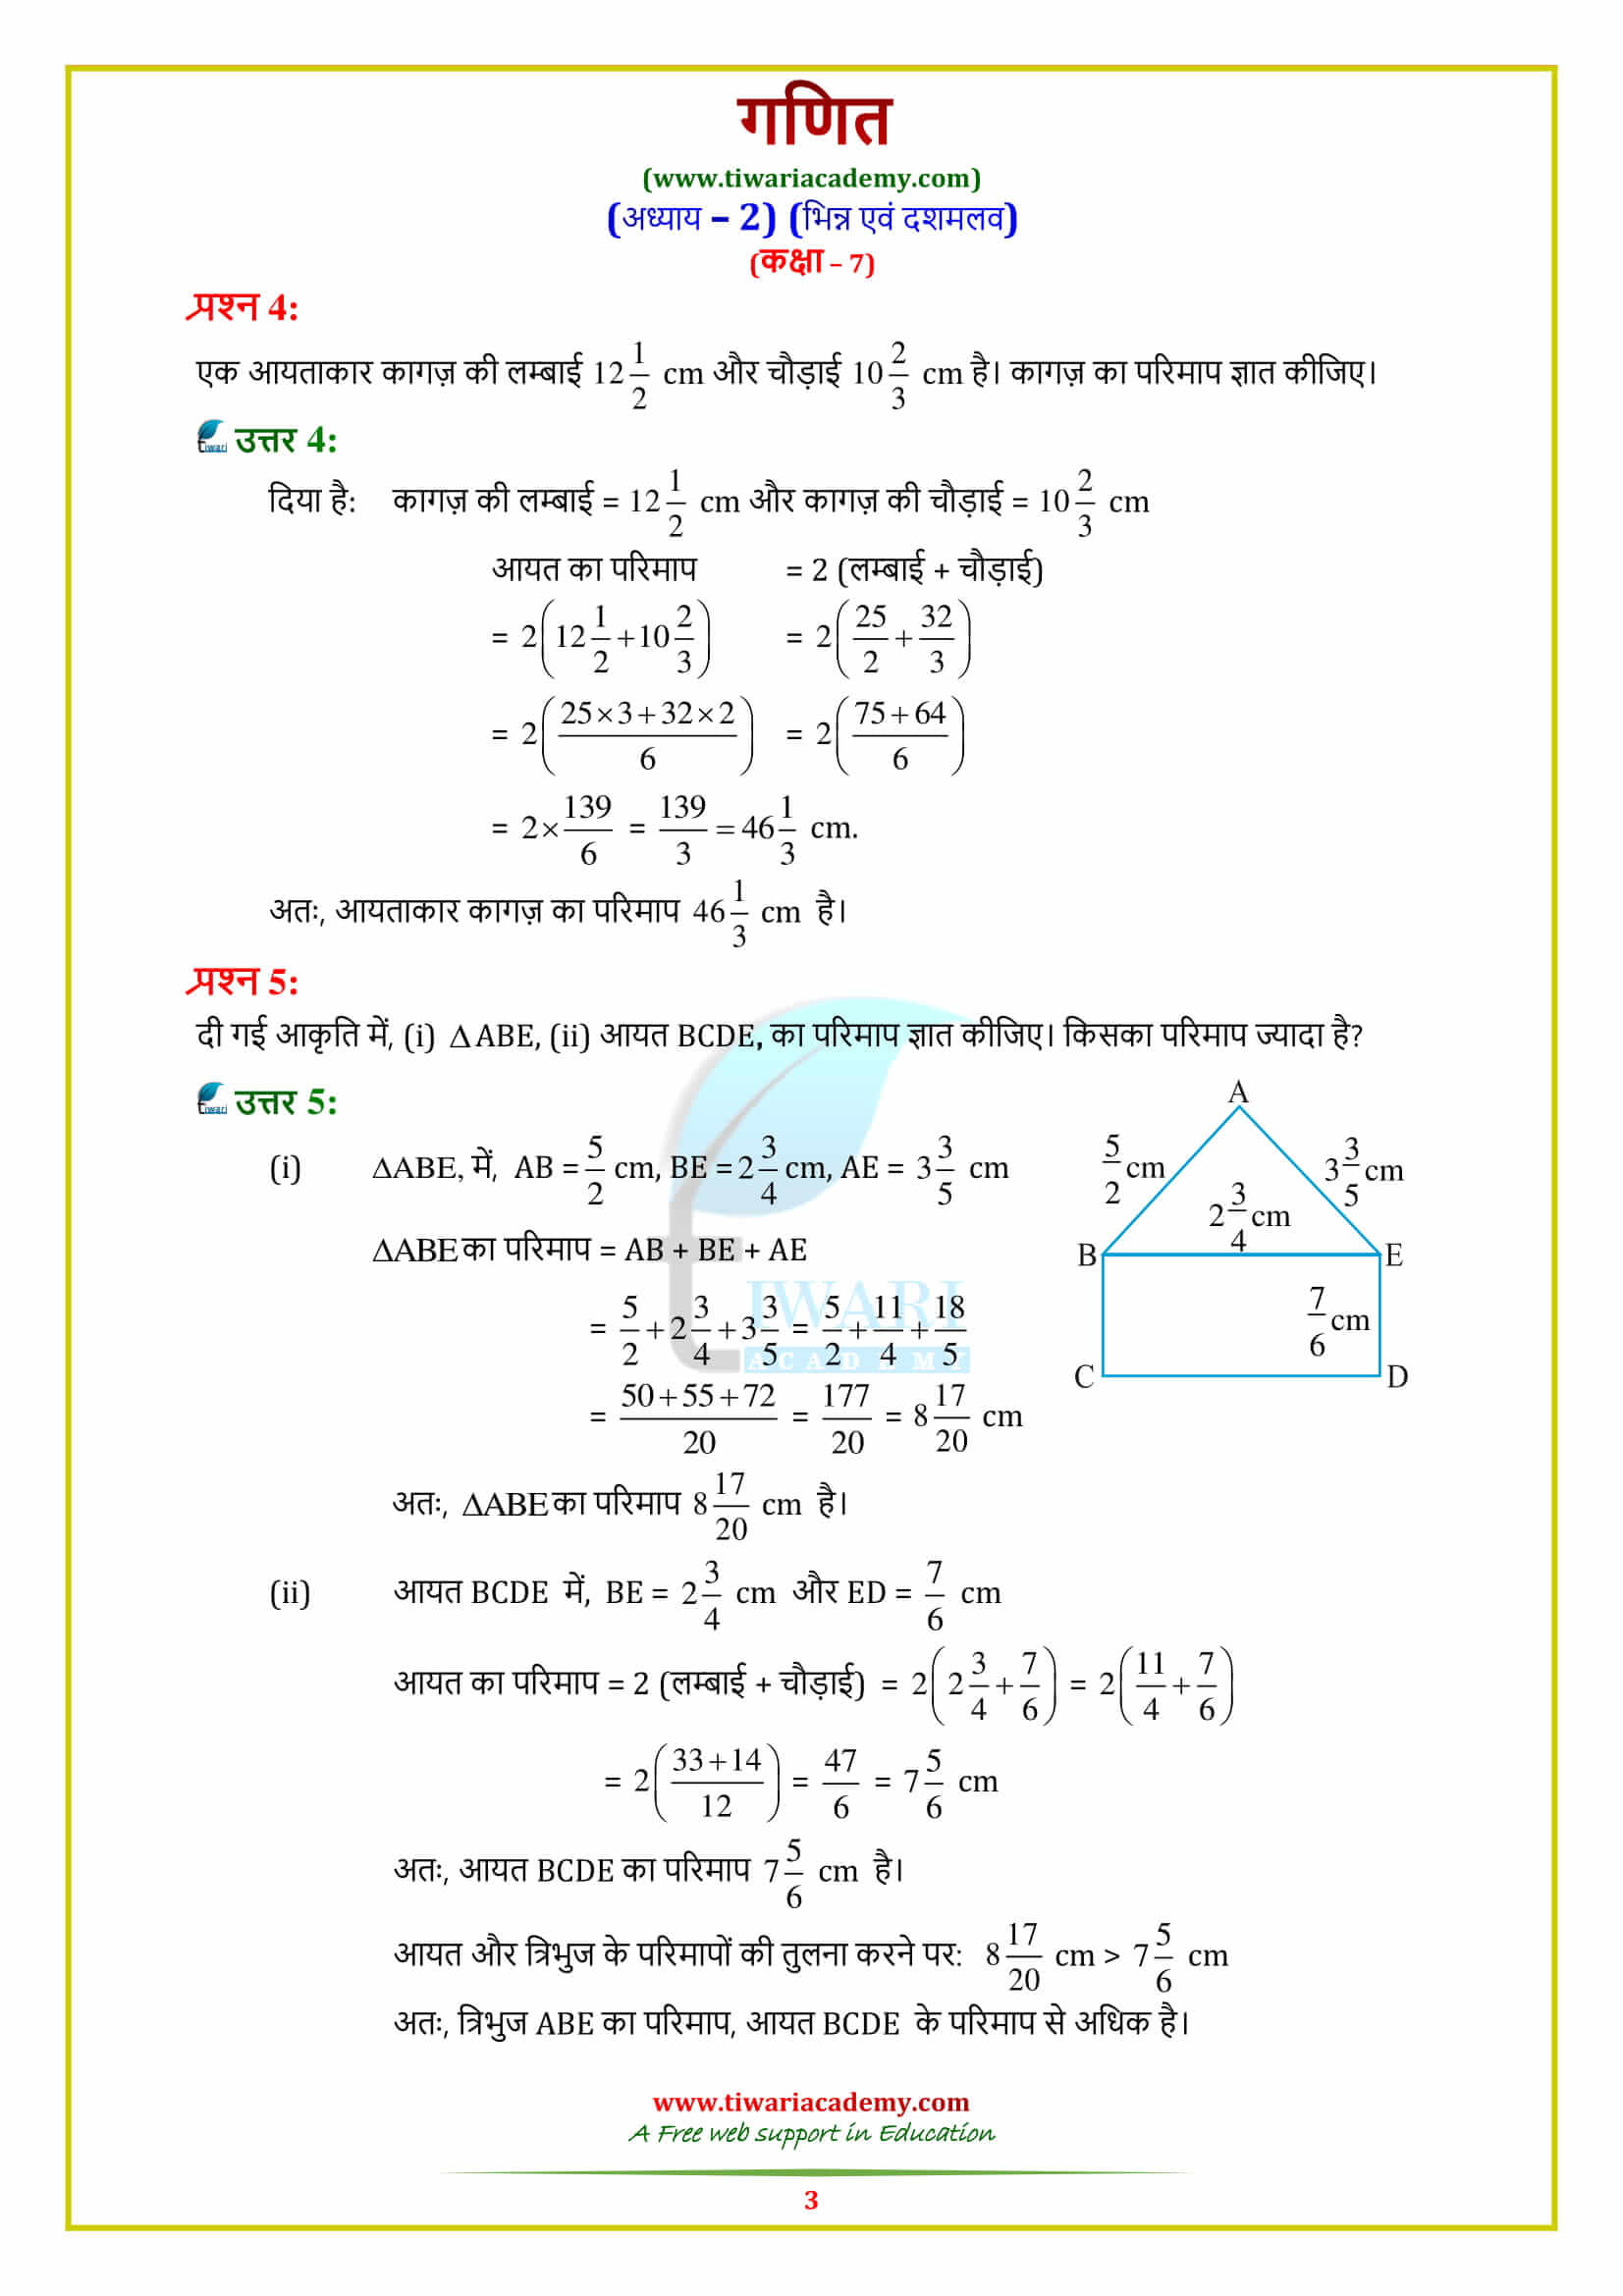 7 Maths Exercise 2.1 solutions in hindi